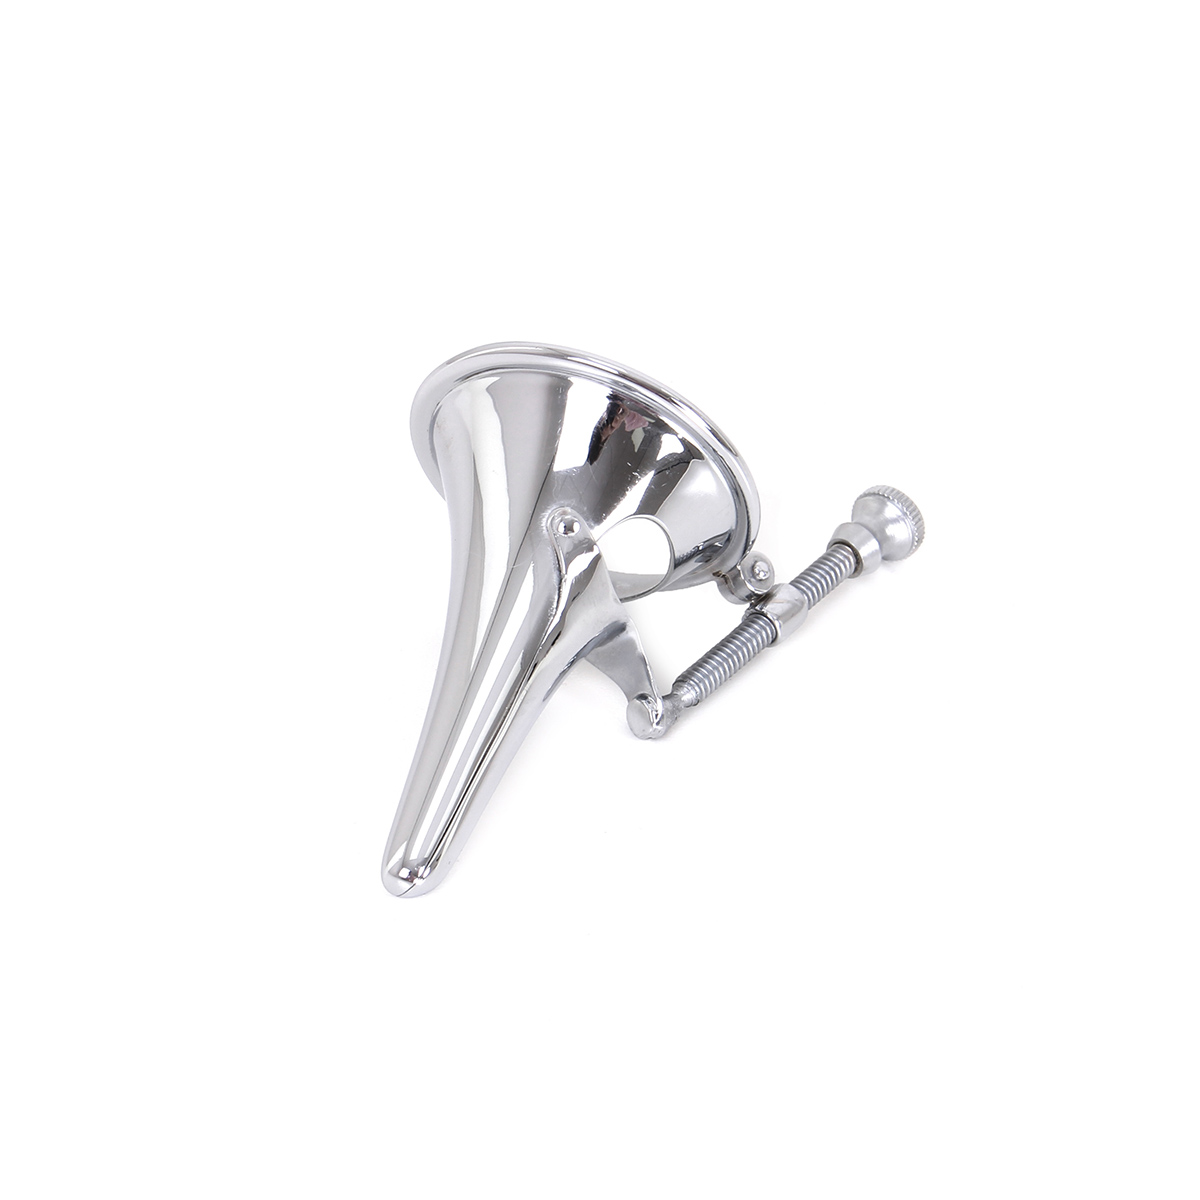 Collin-Small-Anal-Speculum-OPR-2960090-6